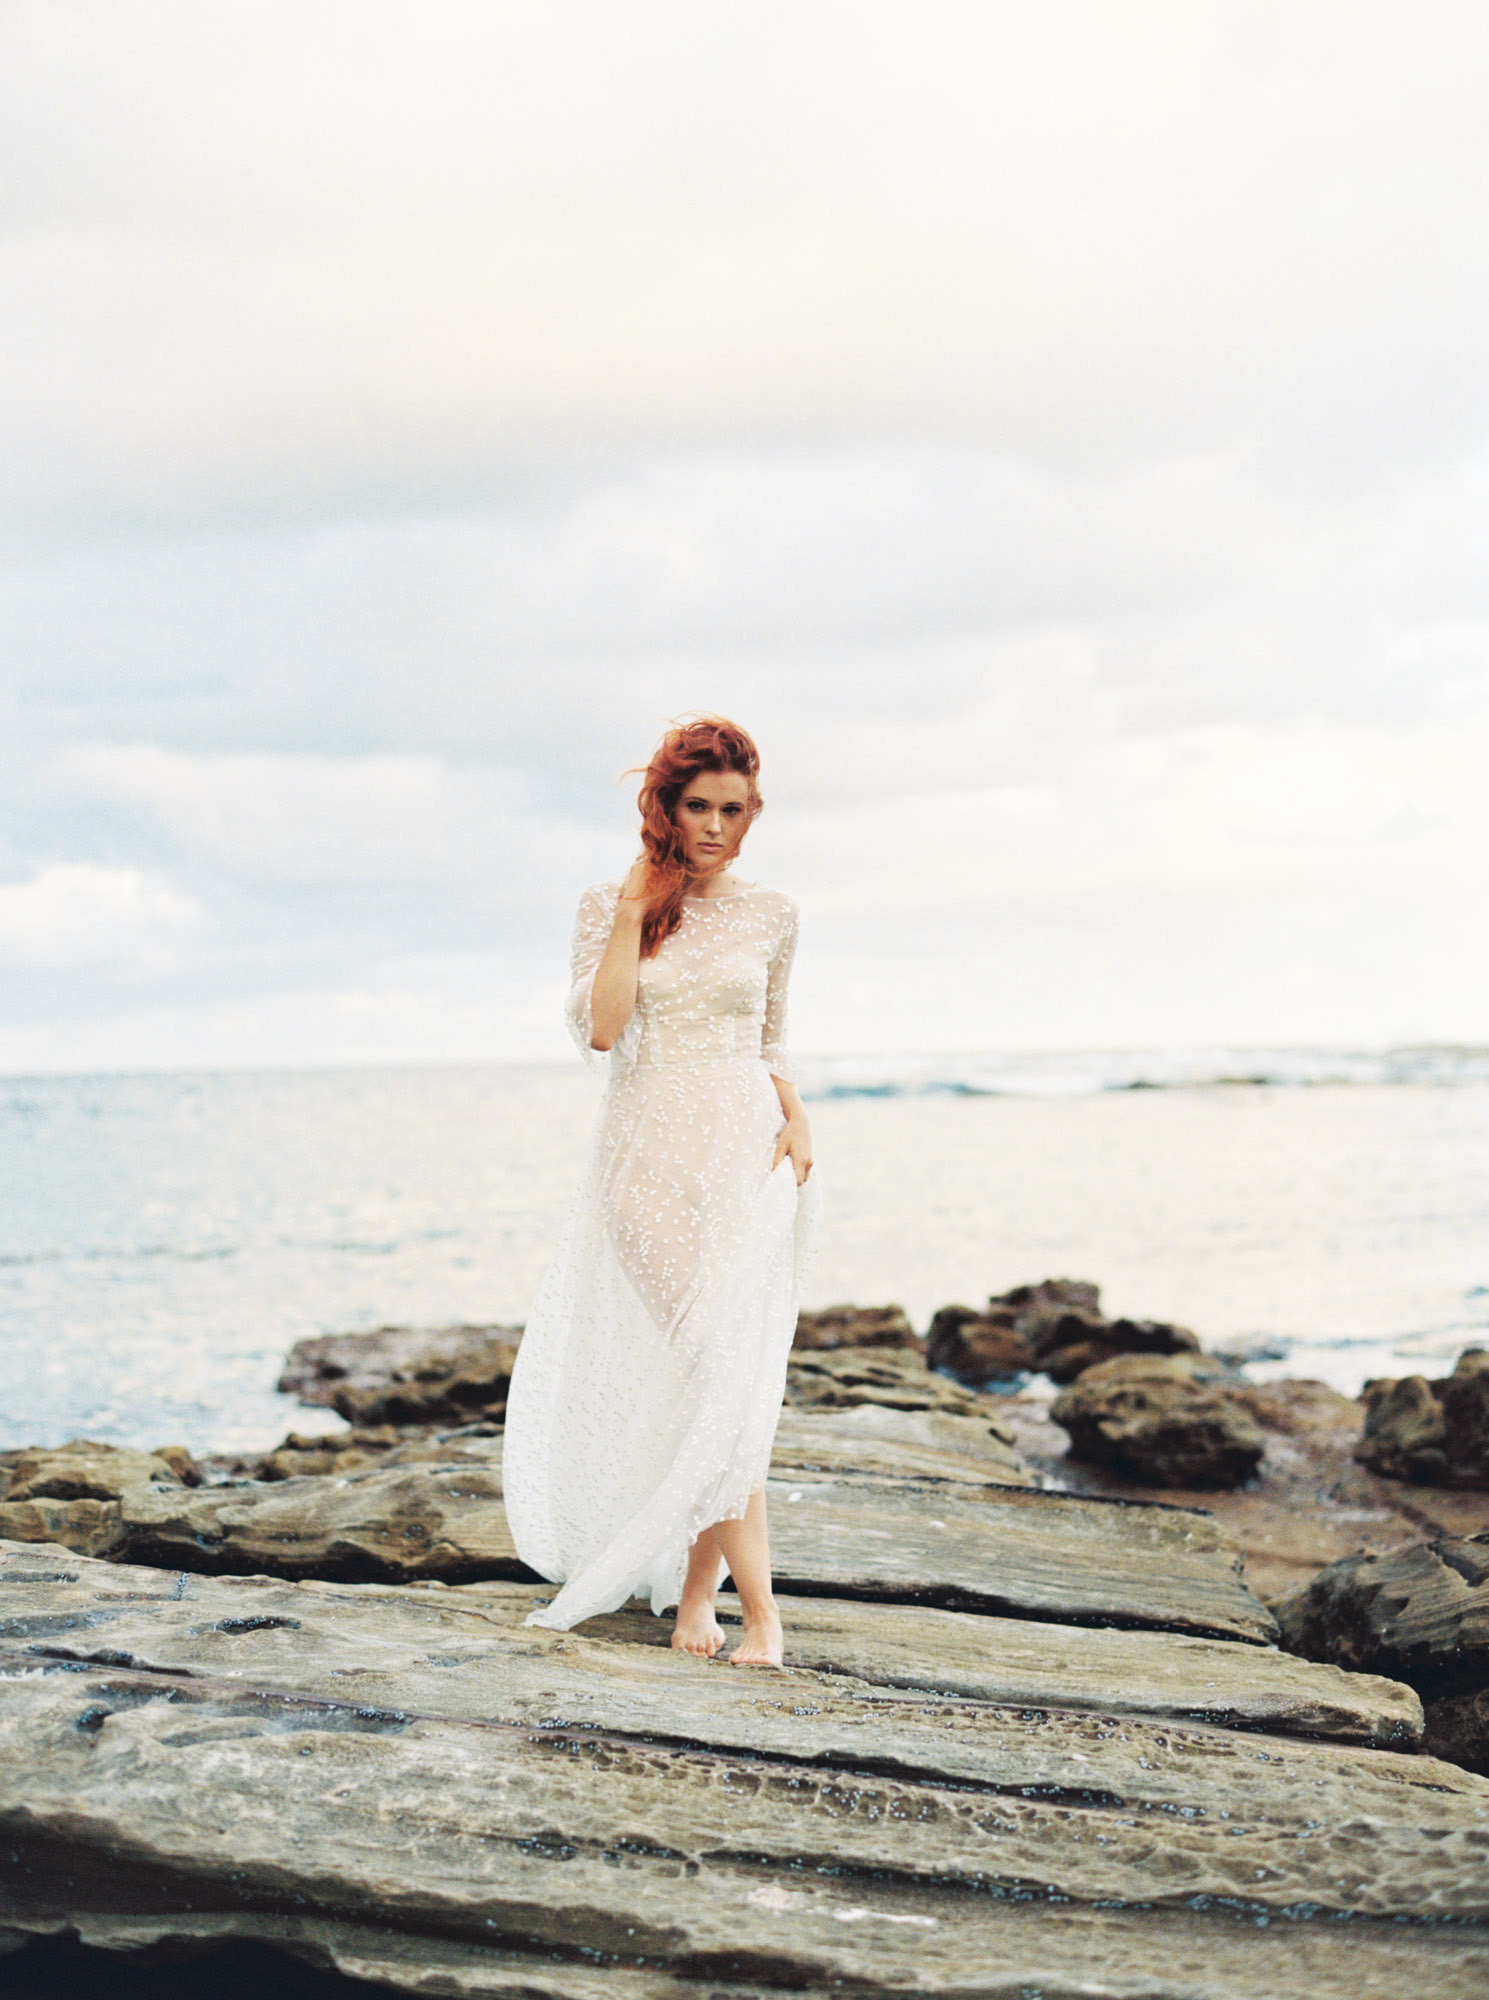 Bridal photoshoot by Central Coast NSW wedding photographer Sheri McMahon, hair and makeup by Niki Simpson, bridal gown by Jennifer Gifford Design, styling by Sandra Chau Design